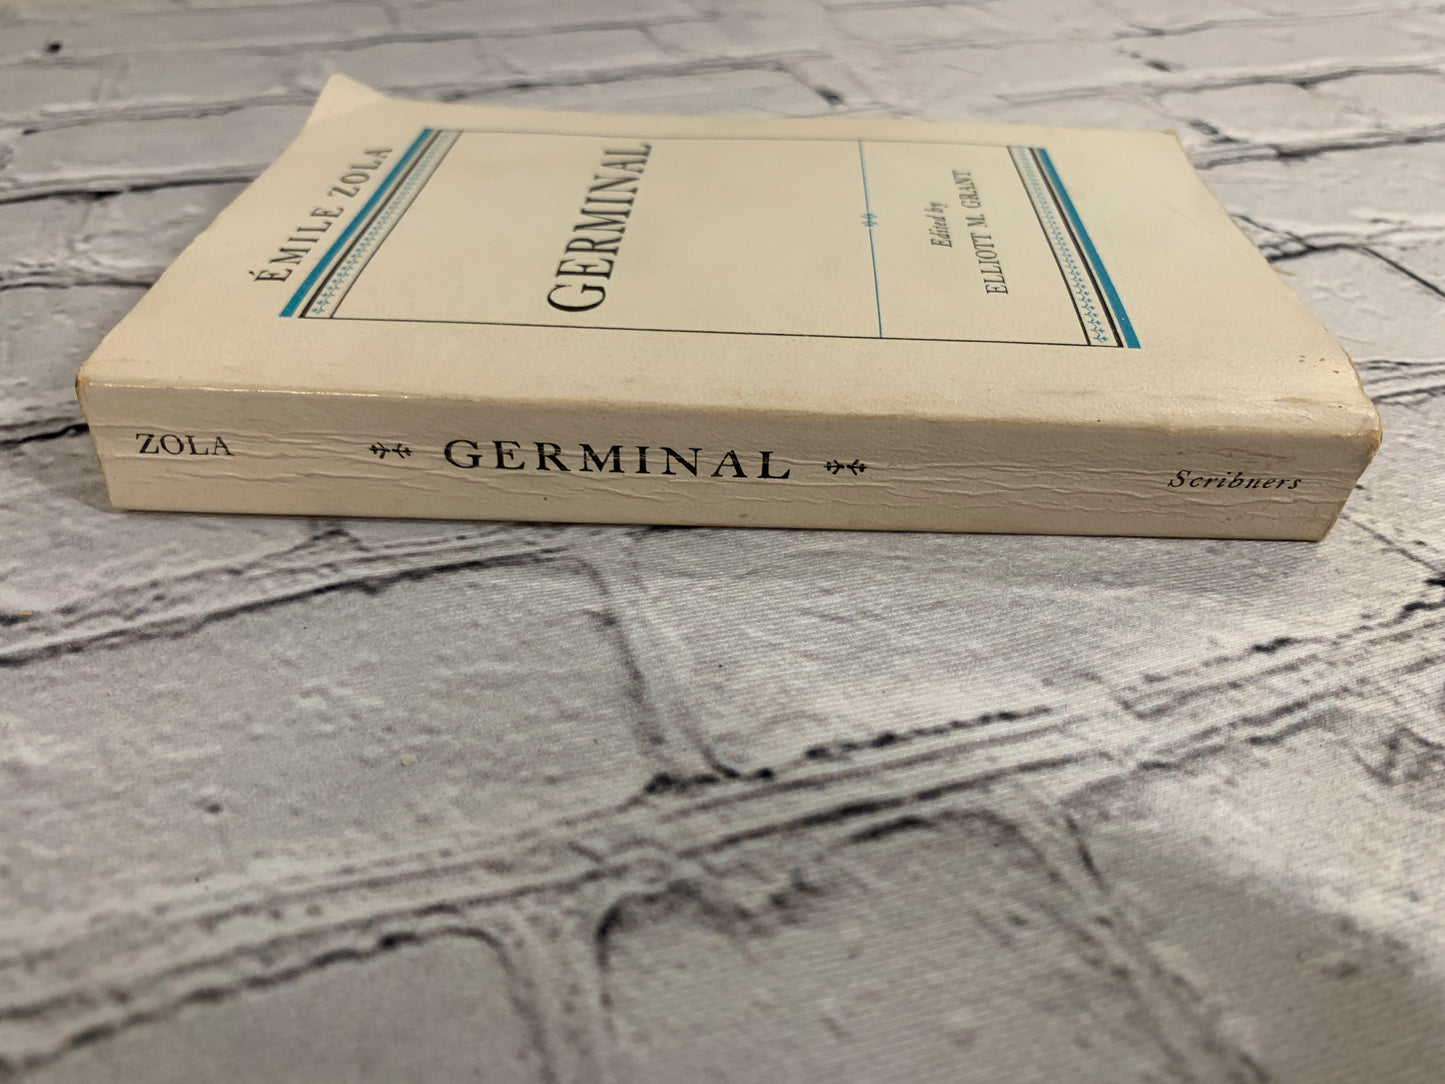 Germinal By Emile Zola [French and English, 1951]